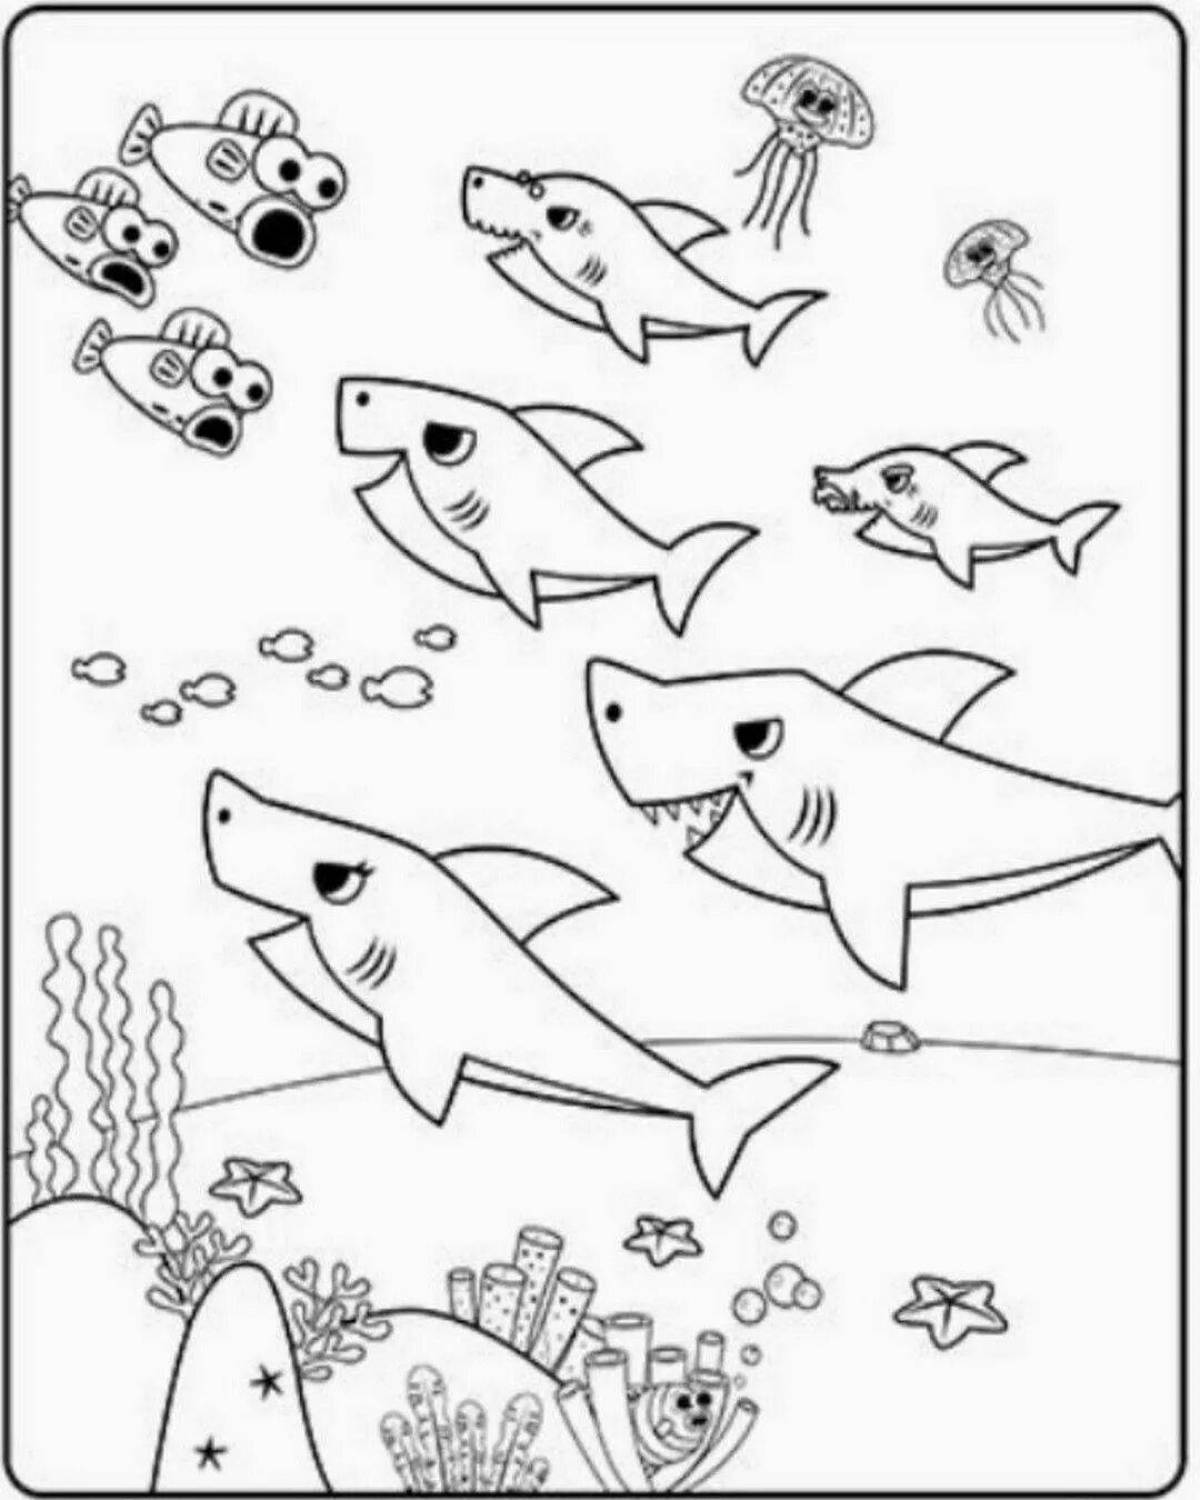 Colorful shark family coloring page